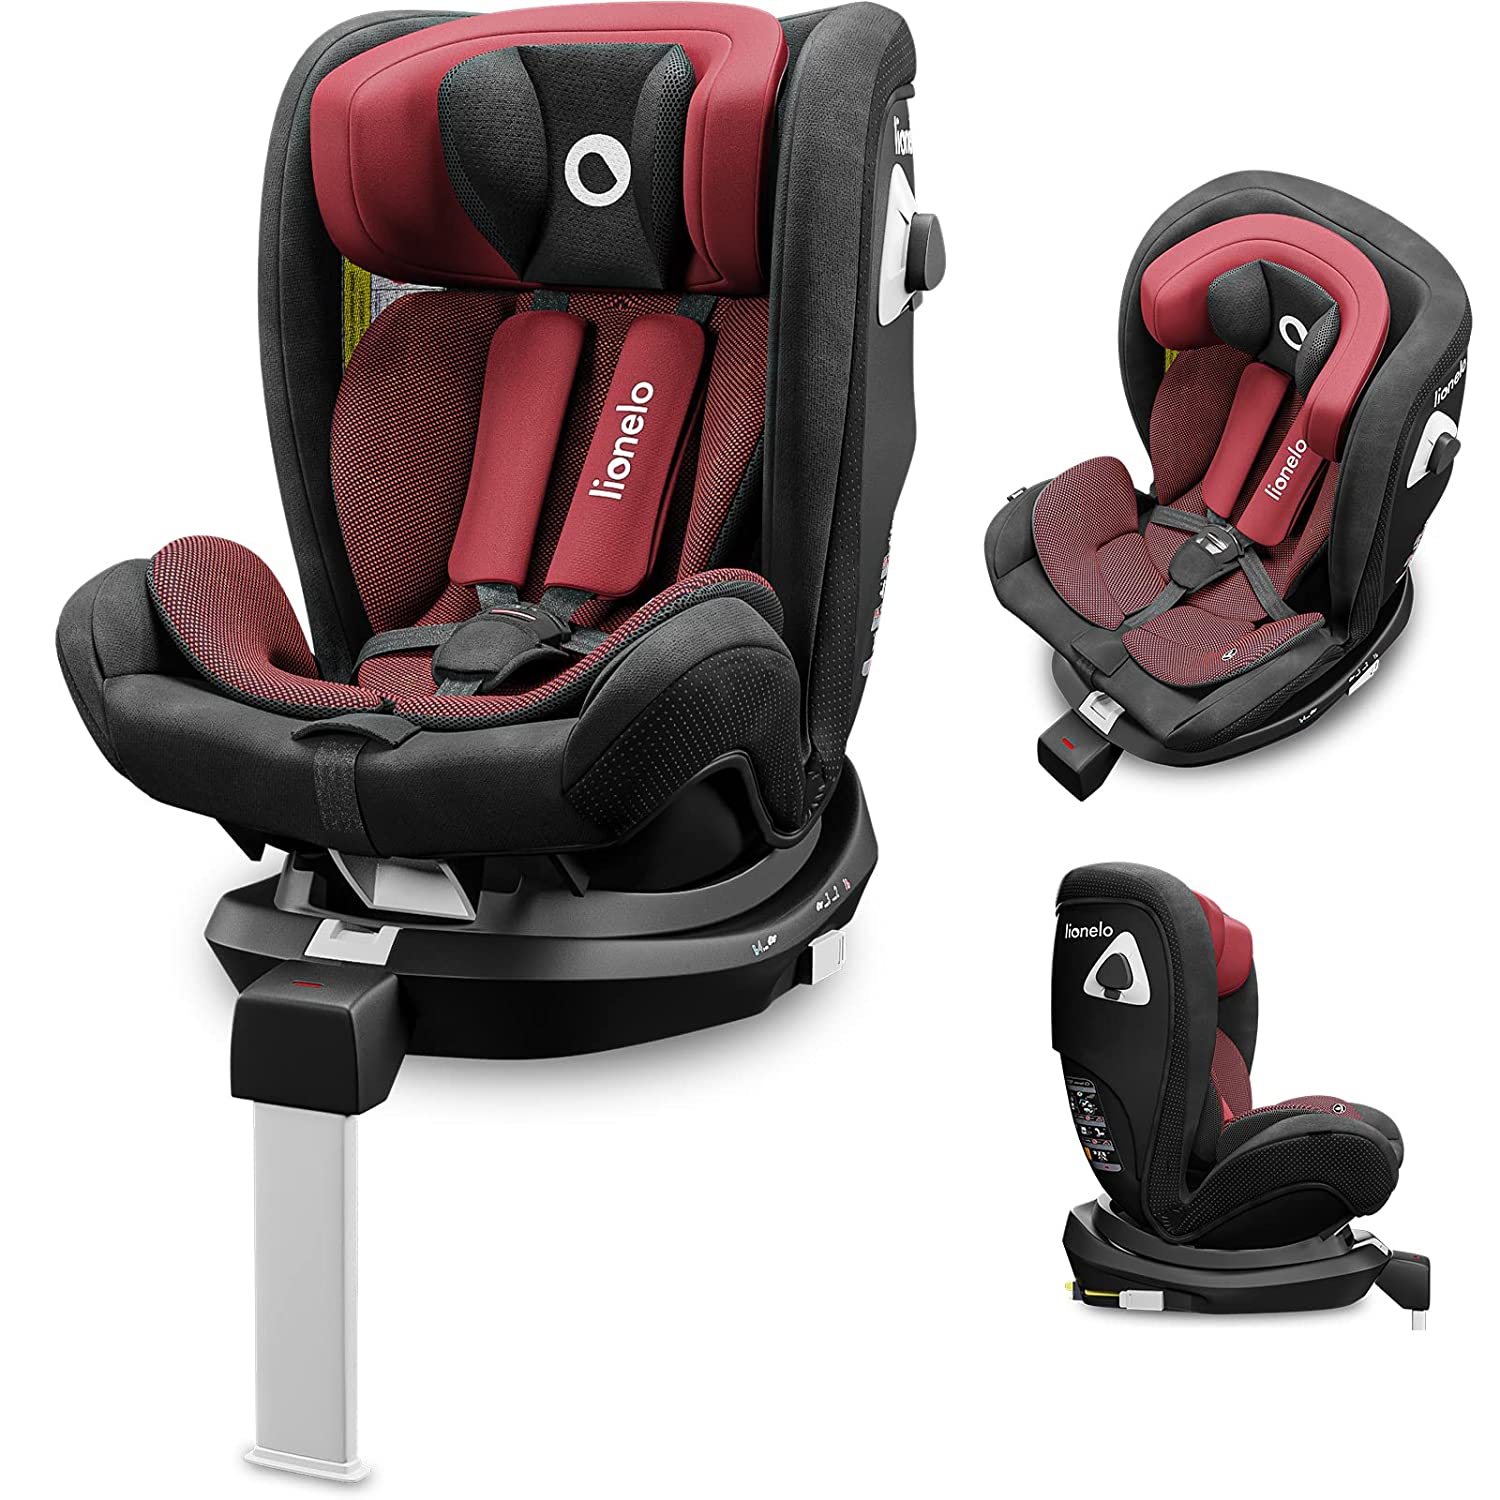 Lionelo Braam Isofix Child Seat and Support Foot or Car Straps Child Seat C